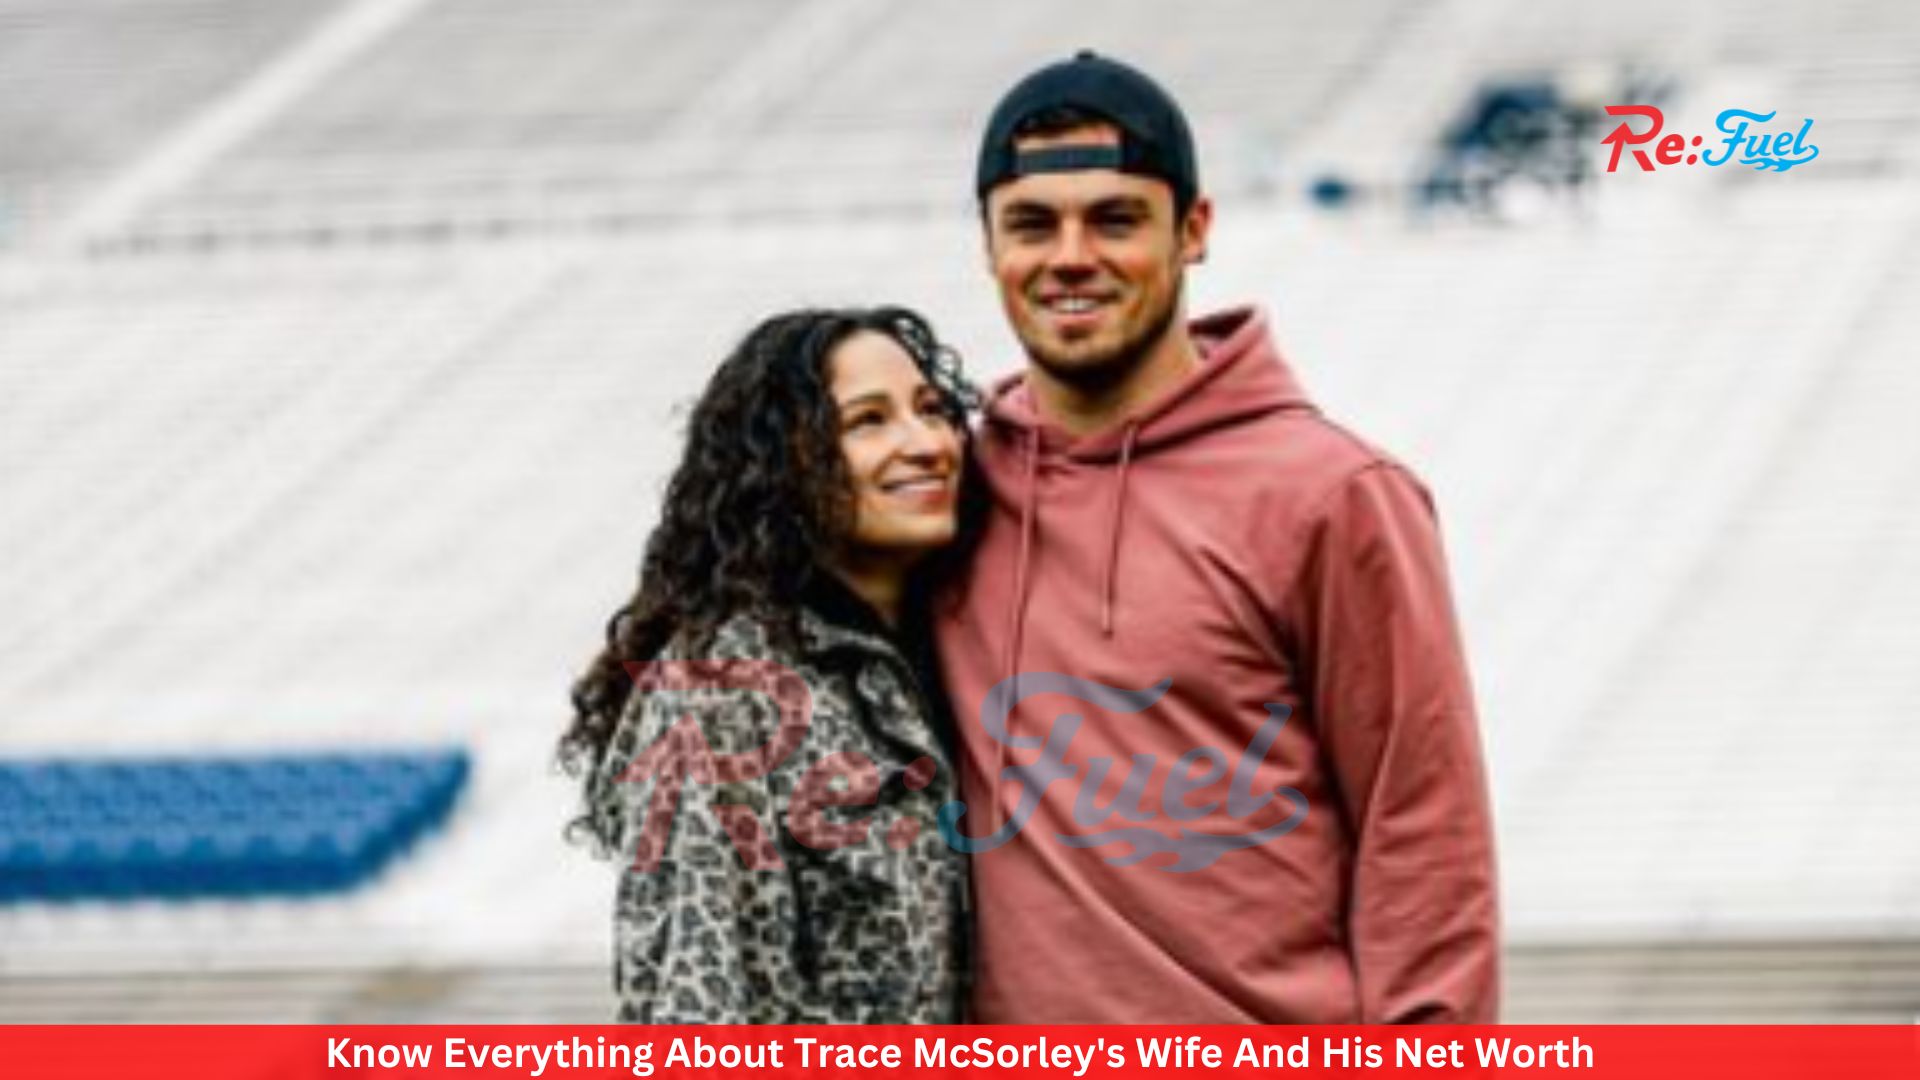 Know Everything About Trace McSorley's Wife And His Net Worth